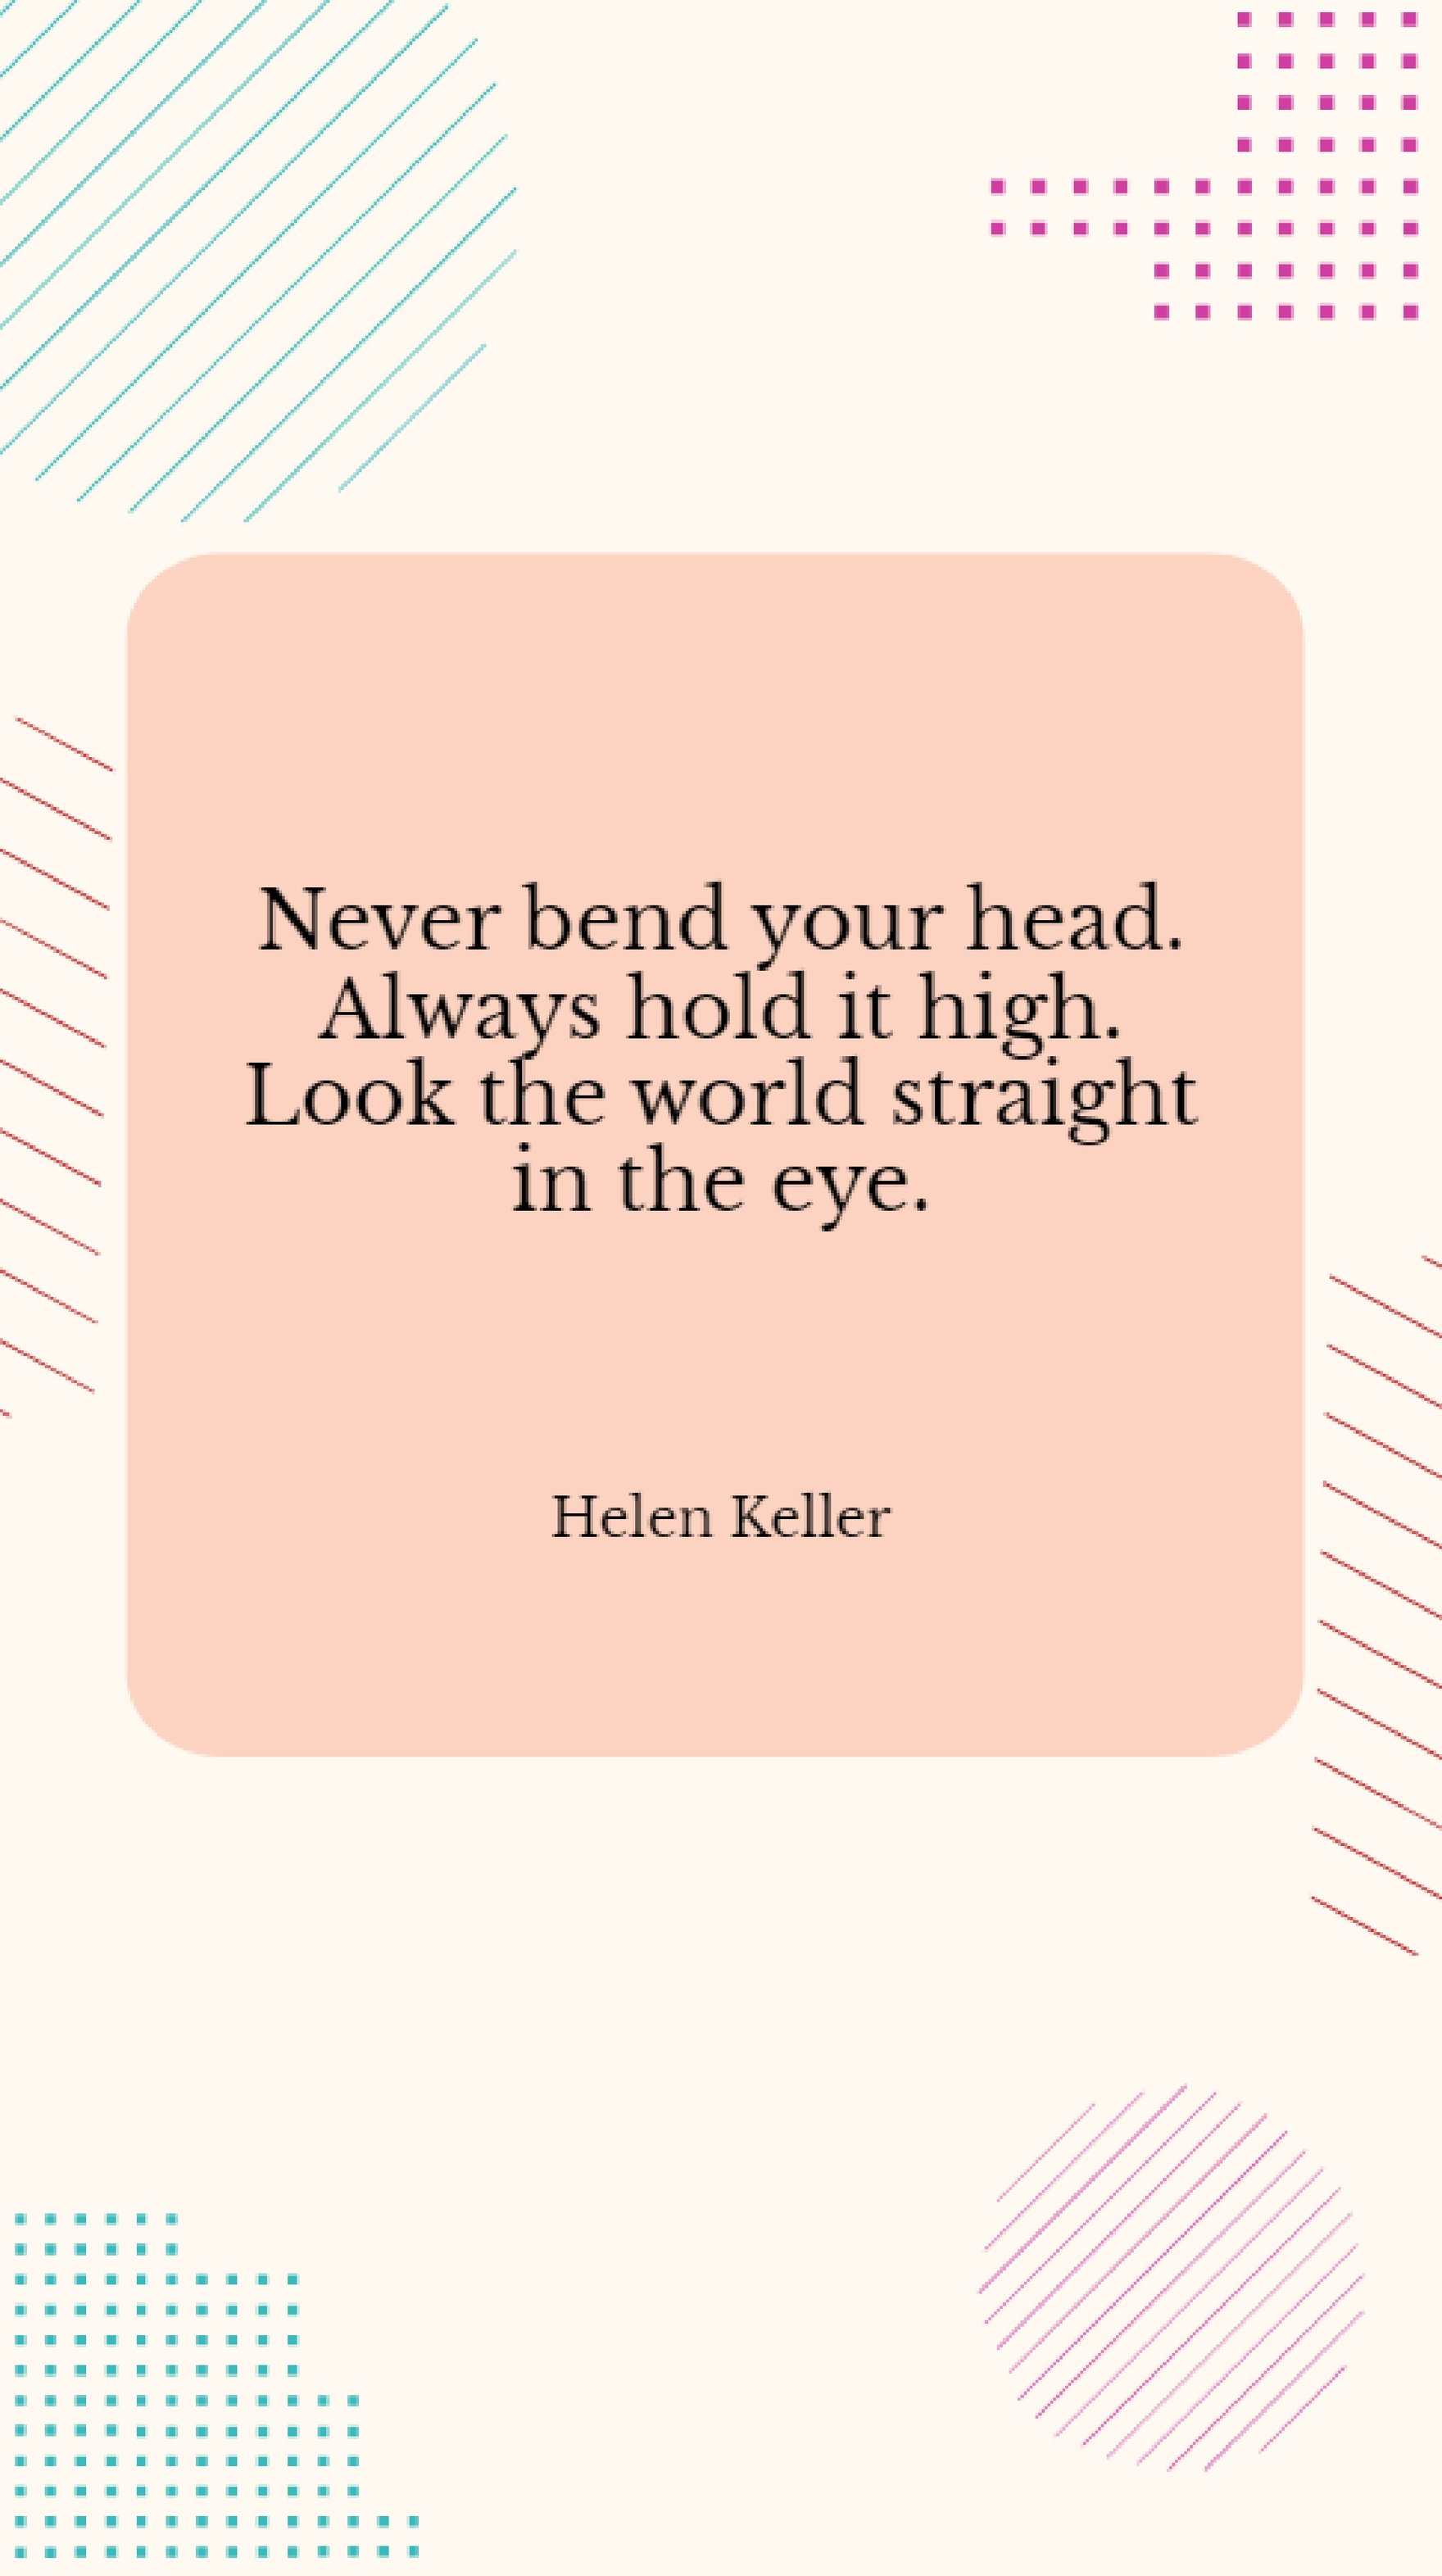 Helen Keller - Never bend your head. Always hold it high. Look the world straight in the eye